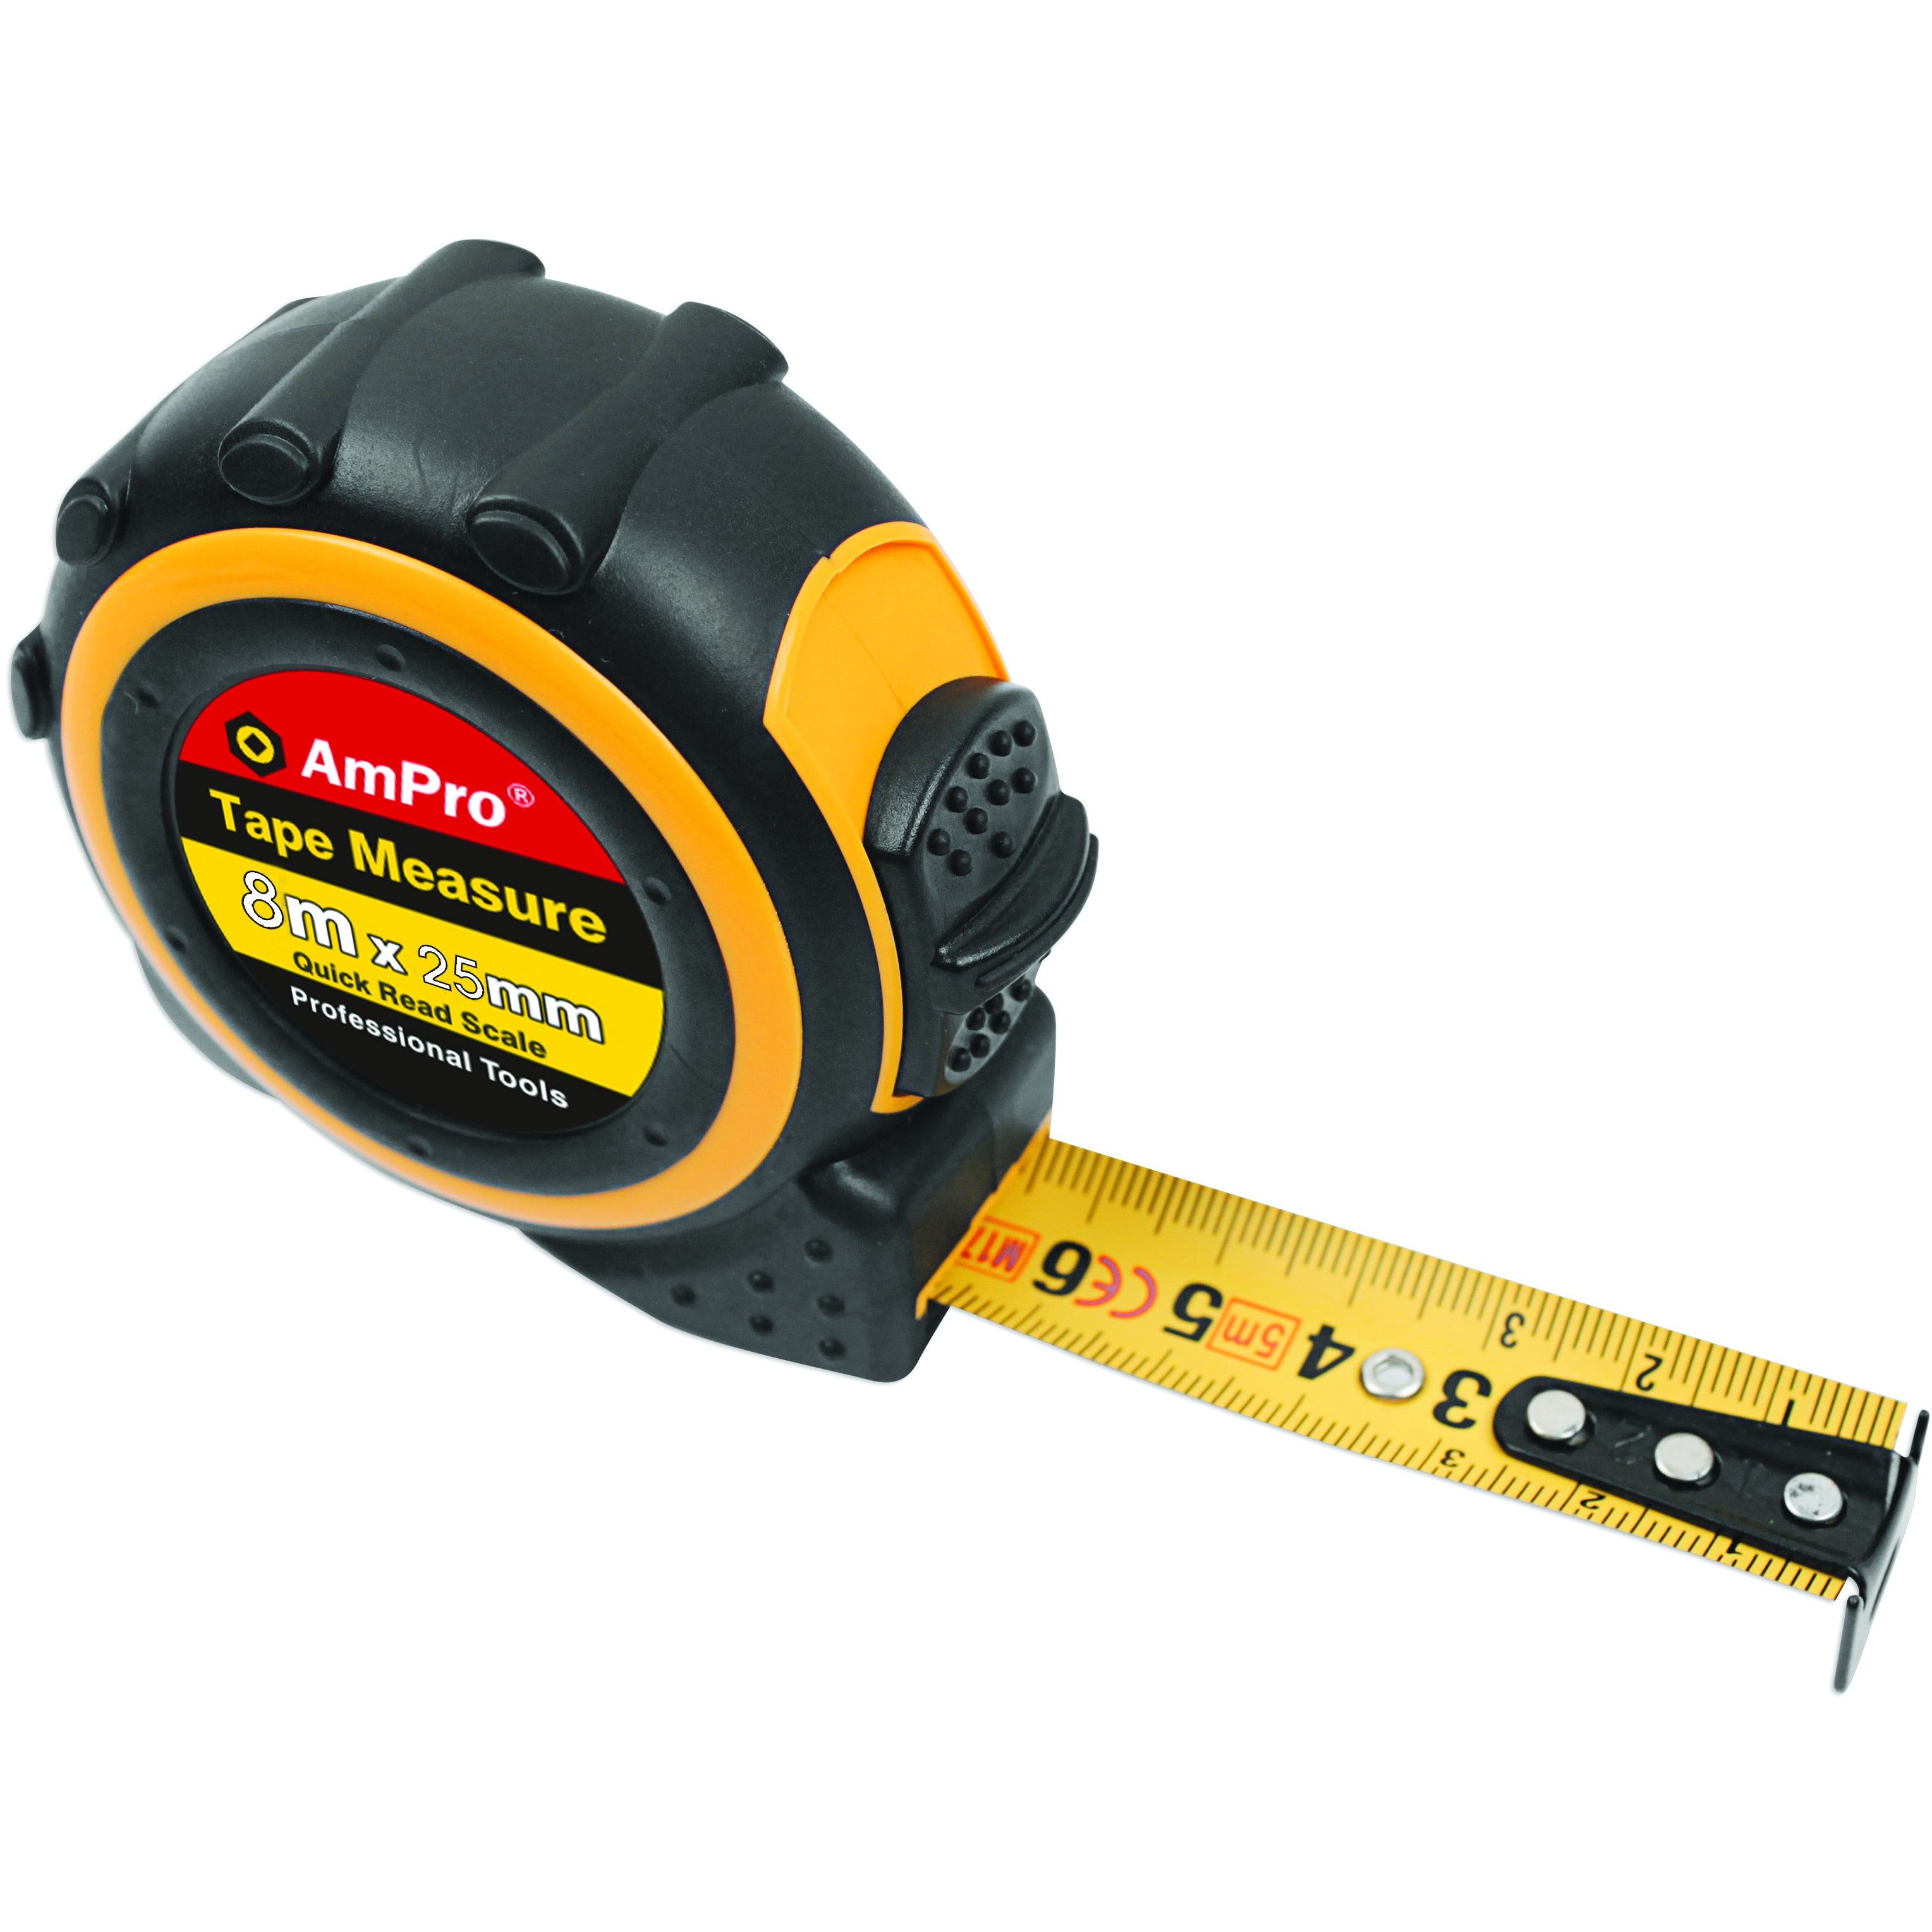 AmPro Tape Measure 8m 8m-Hand Tools-Tool Factory